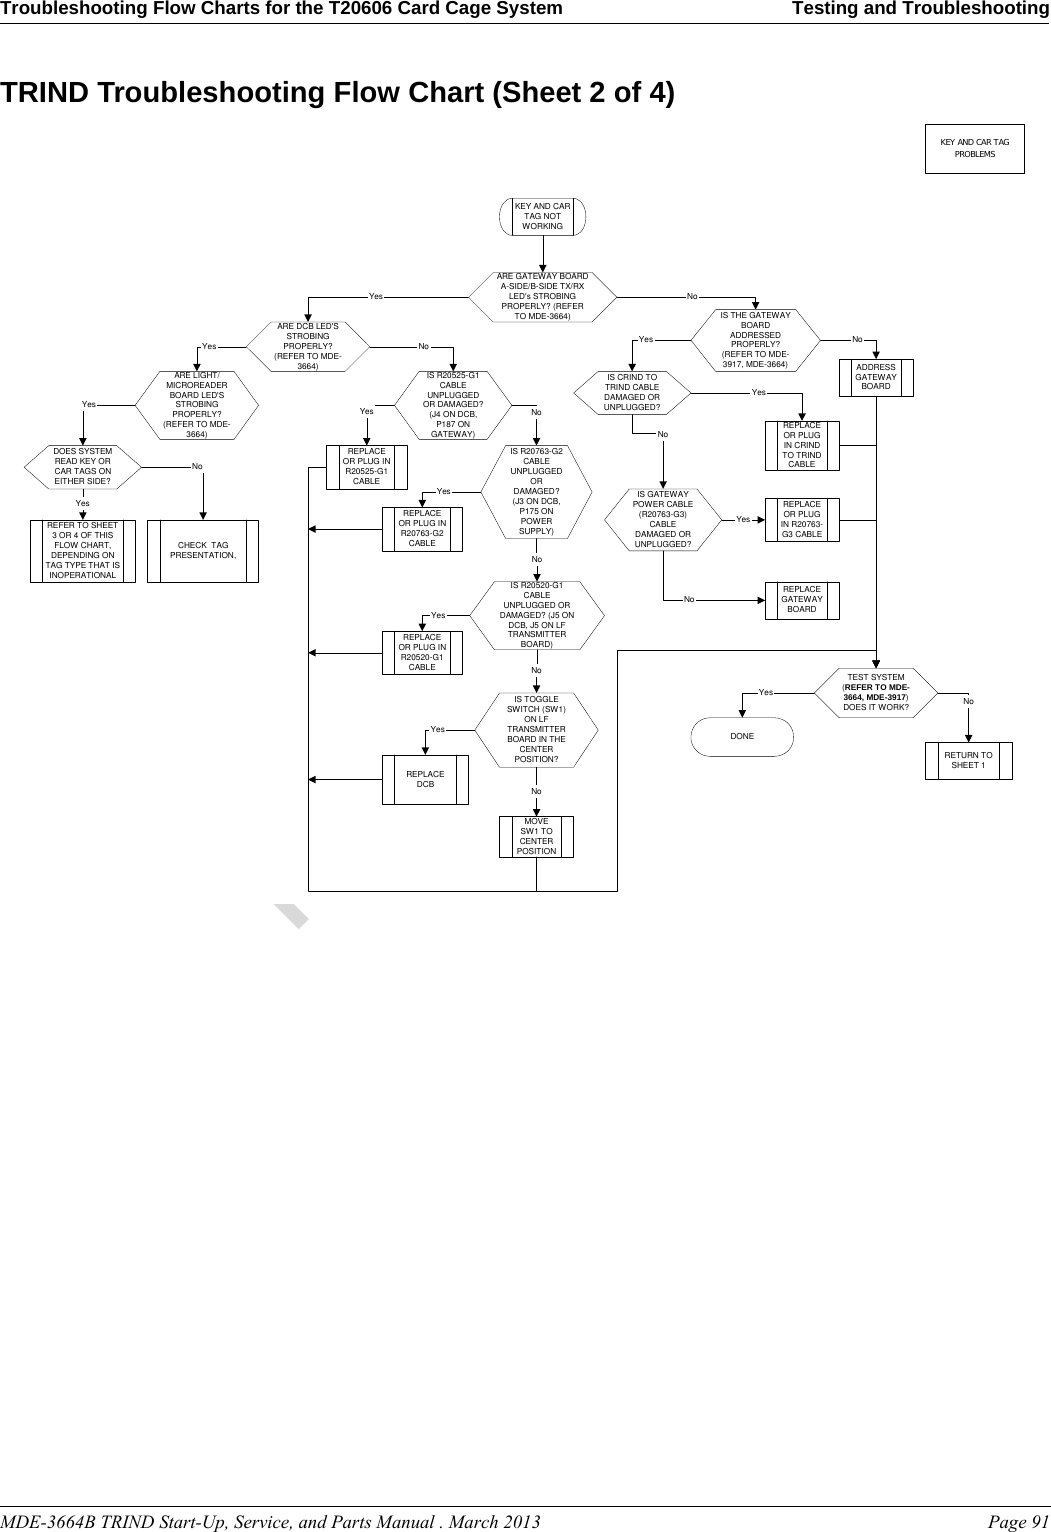 MDE-3664B TRIND Start-Up, Service, and Parts Manual . March 2013 Page 91Troubleshooting Flow Charts for the T20606 Card Cage System Testing and TroubleshootingPreliminaryTRIND Troubleshooting Flow Chart (Sheet 2 of 4)KEY AND CAR TAGPROBLEMSKEY AND CARTAG NOTWORKINGARE GATEWAY BOARDA-SIDE/B-SIDE TX/RXLED&apos;s STROBINGPROPERLY? (REFERTO MDE-3664)Yes NoARE DCB LED&apos;SSTROBINGPROPERLY?(REFER TO MDE-3664)IS THE GATEWAYBOARDADDRESSEDPROPERLY?(REFER TO MDE-3917, MDE-3664)Yes No Yes NoARE LIGHT/MICROREADERBOARD LED&apos;SSTROBINGPROPERLY?(REFER TO MDE-3664)IS R20525-G1CABLEUNPLUGGEDOR DAMAGED?(J4 ON DCB,P187 ONGATEWAY)IS CRIND TOTRIND CABLEDAMAGED ORUNPLUGGED?ADDRESSGATEWAYBOARDREPLACEOR PLUGIN CRINDTO TRINDCABLEYesREPLACEOR PLUG INR20525-G1CABLEYesYesDOES SYSTEMREAD KEY ORCAR TAGS ONEITHER SIDE?YesREFER TO SHEET3 OR 4 OF THISFLOW CHART,DEPENDING ONTAG TYPE THAT ISINOPERATIONALNoNoCHECK  TAGPRESENTATION,IS R20763-G2CABLEUNPLUGGEDORDAMAGED?(J3 ON DCB,P175 ONPOWERSUPPLY)REPLACEOR PLUG INR20763-G2CABLEYesREPLACEOR PLUGIN R20763-G3 CABLENoIS R20520-G1CABLEUNPLUGGED ORDAMAGED? (J5 ONDCB, J5 ON LFTRANSMITTERBOARD)REPLACEOR PLUG INR20520-G1CABLEYesNoNoIS TOGGLESWITCH (SW1)ON LFTRANSMITTERBOARD IN THECENTERPOSITION?NoMOVESW1 TOCENTERPOSITIONYesREPLACEDCBTEST SYSTEM(REFER TO MDE-3664, MDE-3917)DOES IT WORK?Yes NoDONERETURN TOSHEET 1REPLACEGATEWAYBOARDIS GATEWAYPOWER CABLE(R20763-G3)CABLEDAMAGED ORUNPLUGGED?YesNo